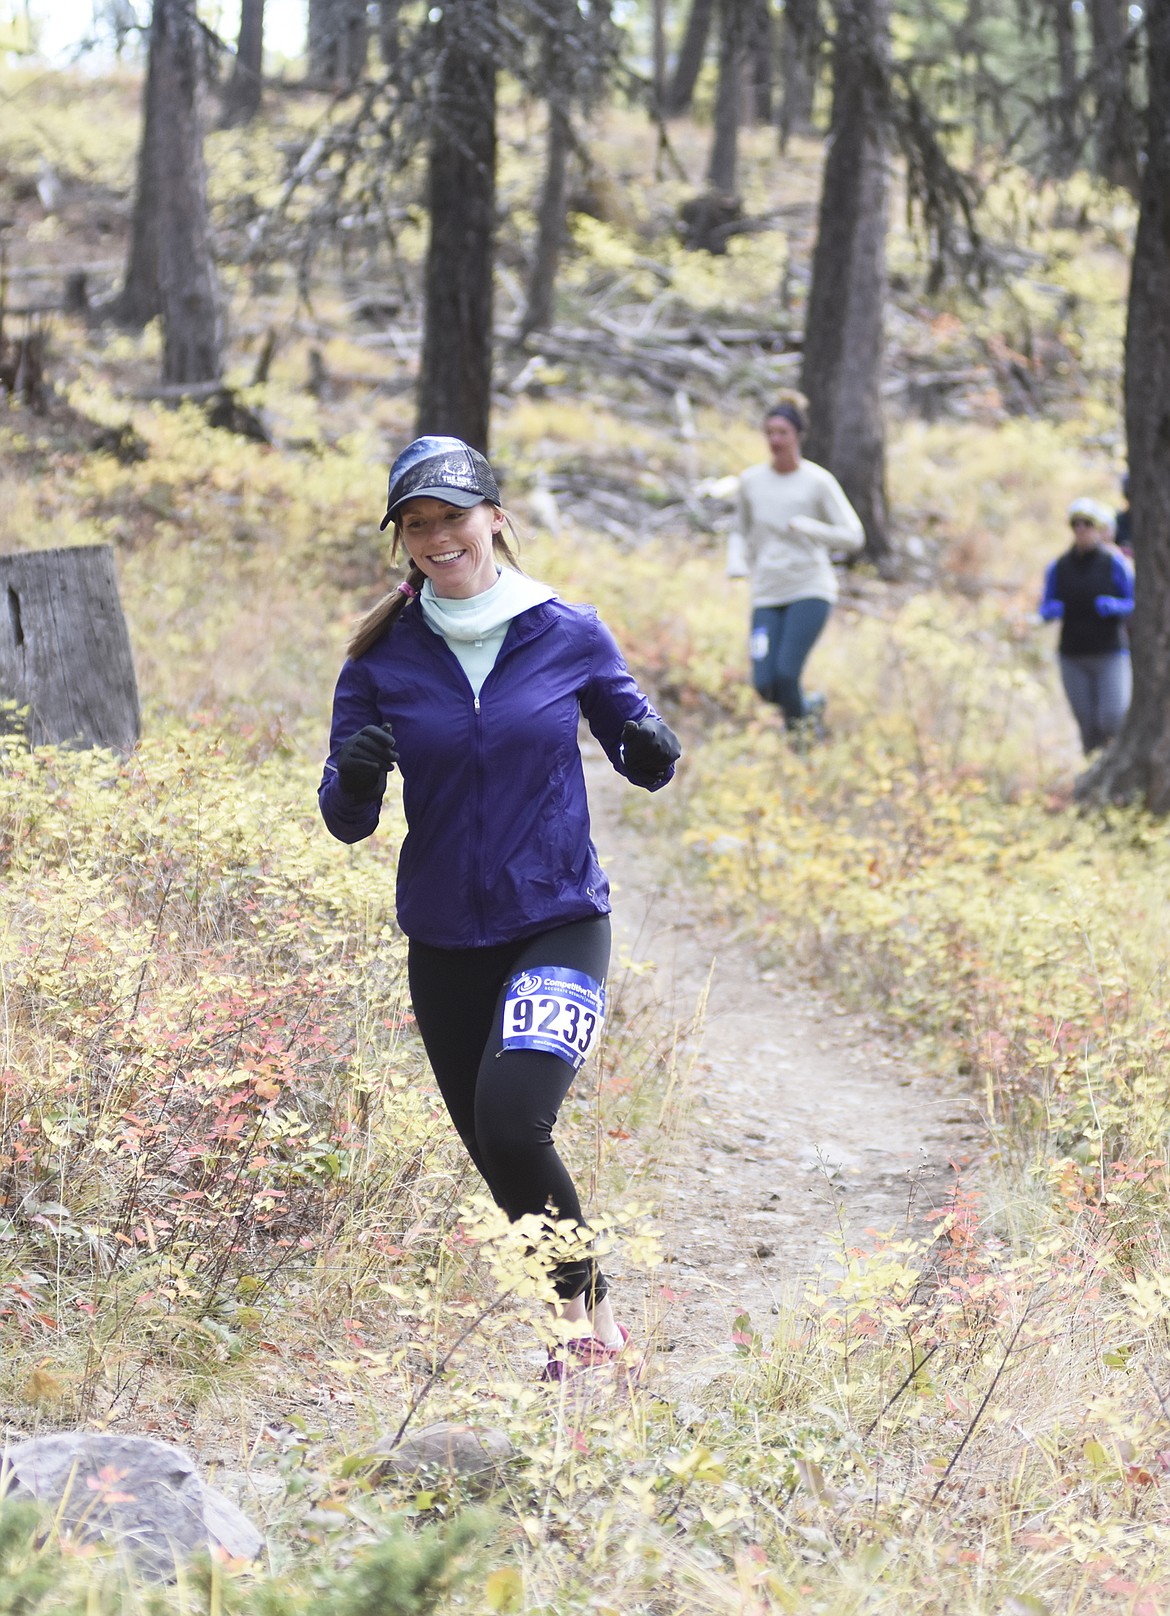 Elizabeth Richardson smiles as she rounds a corner during the start of the 10K during the Whitefish Trail Legacy Run Sunday morning. (Heidi Desch/Whitefish Pilot)